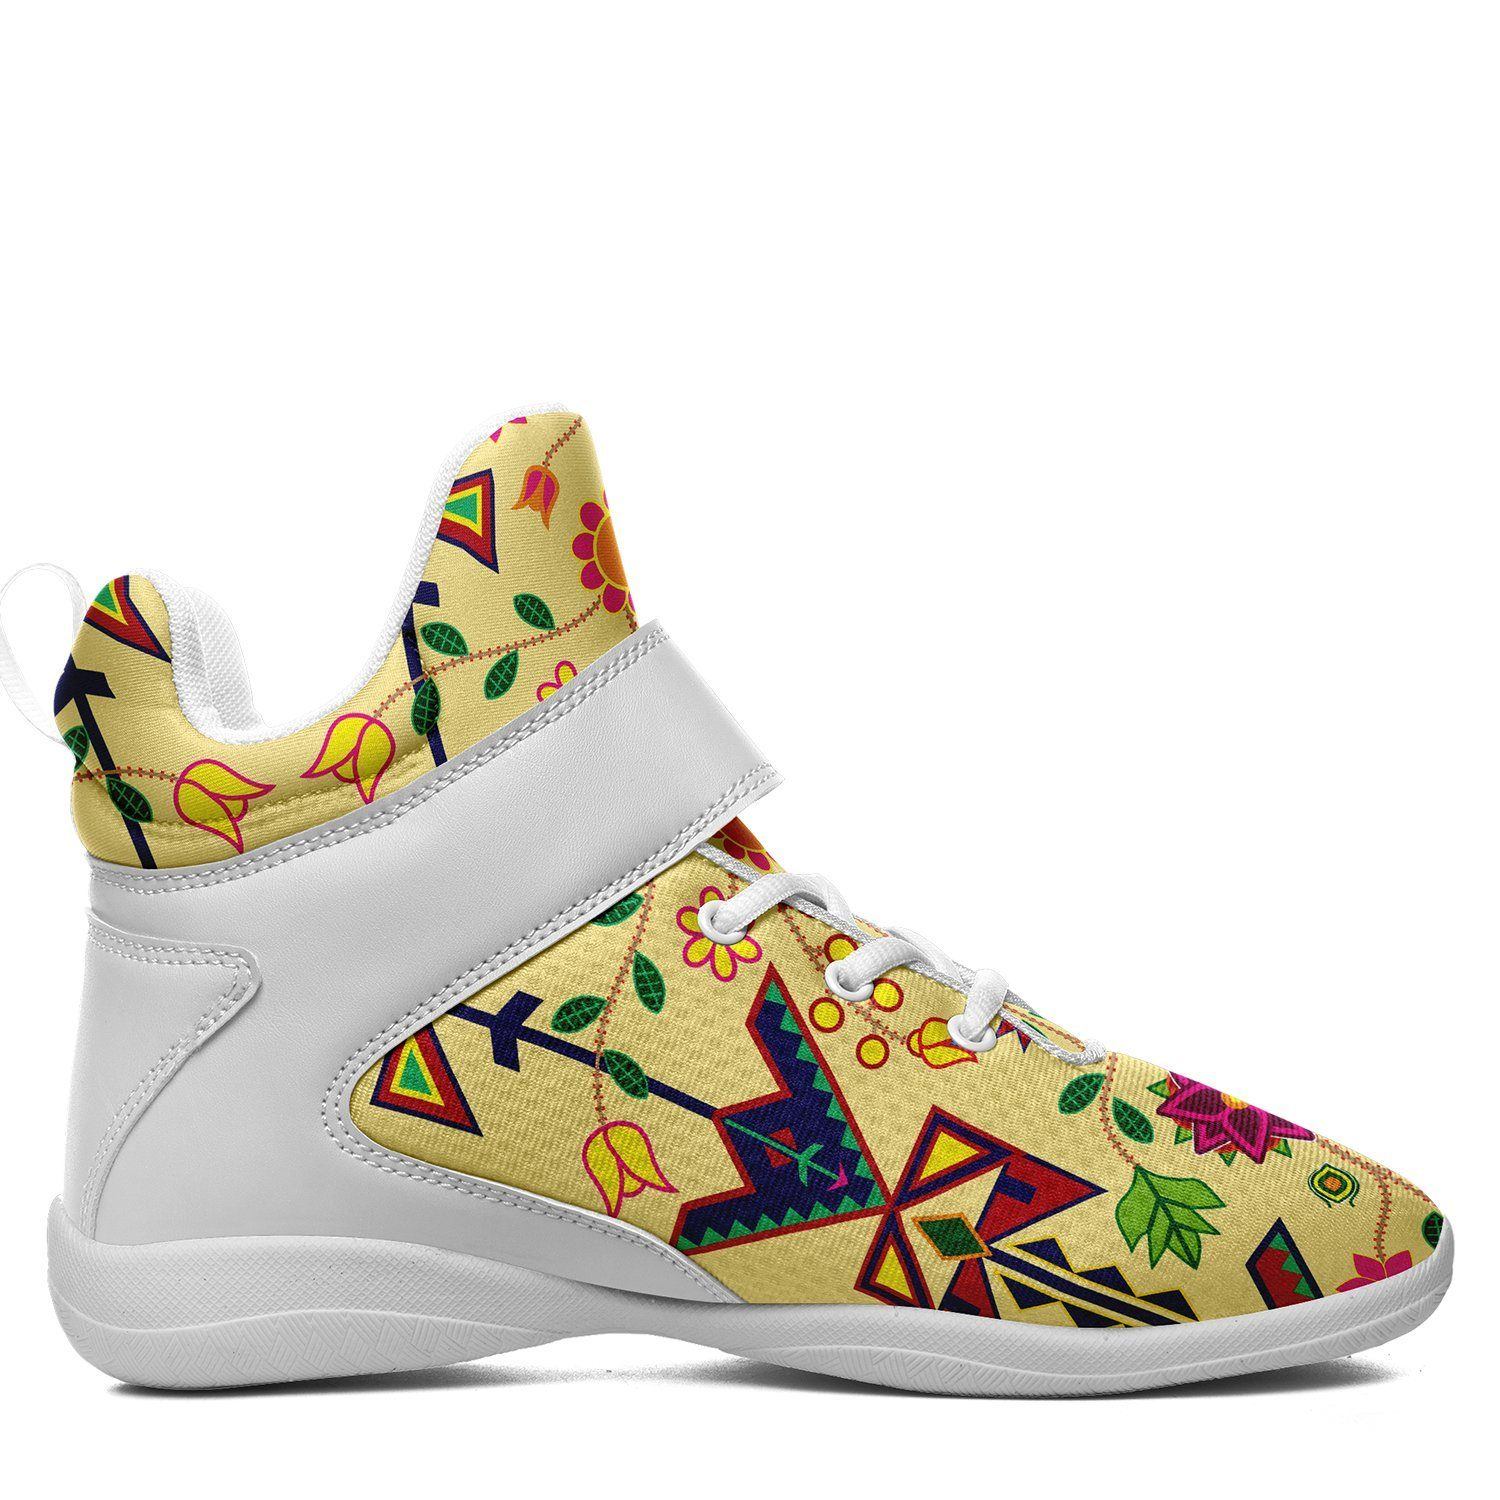 Geometric Floral Spring Vanilla Ipottaa Basketball / Sport High Top Shoes - White Sole 49 Dzine 